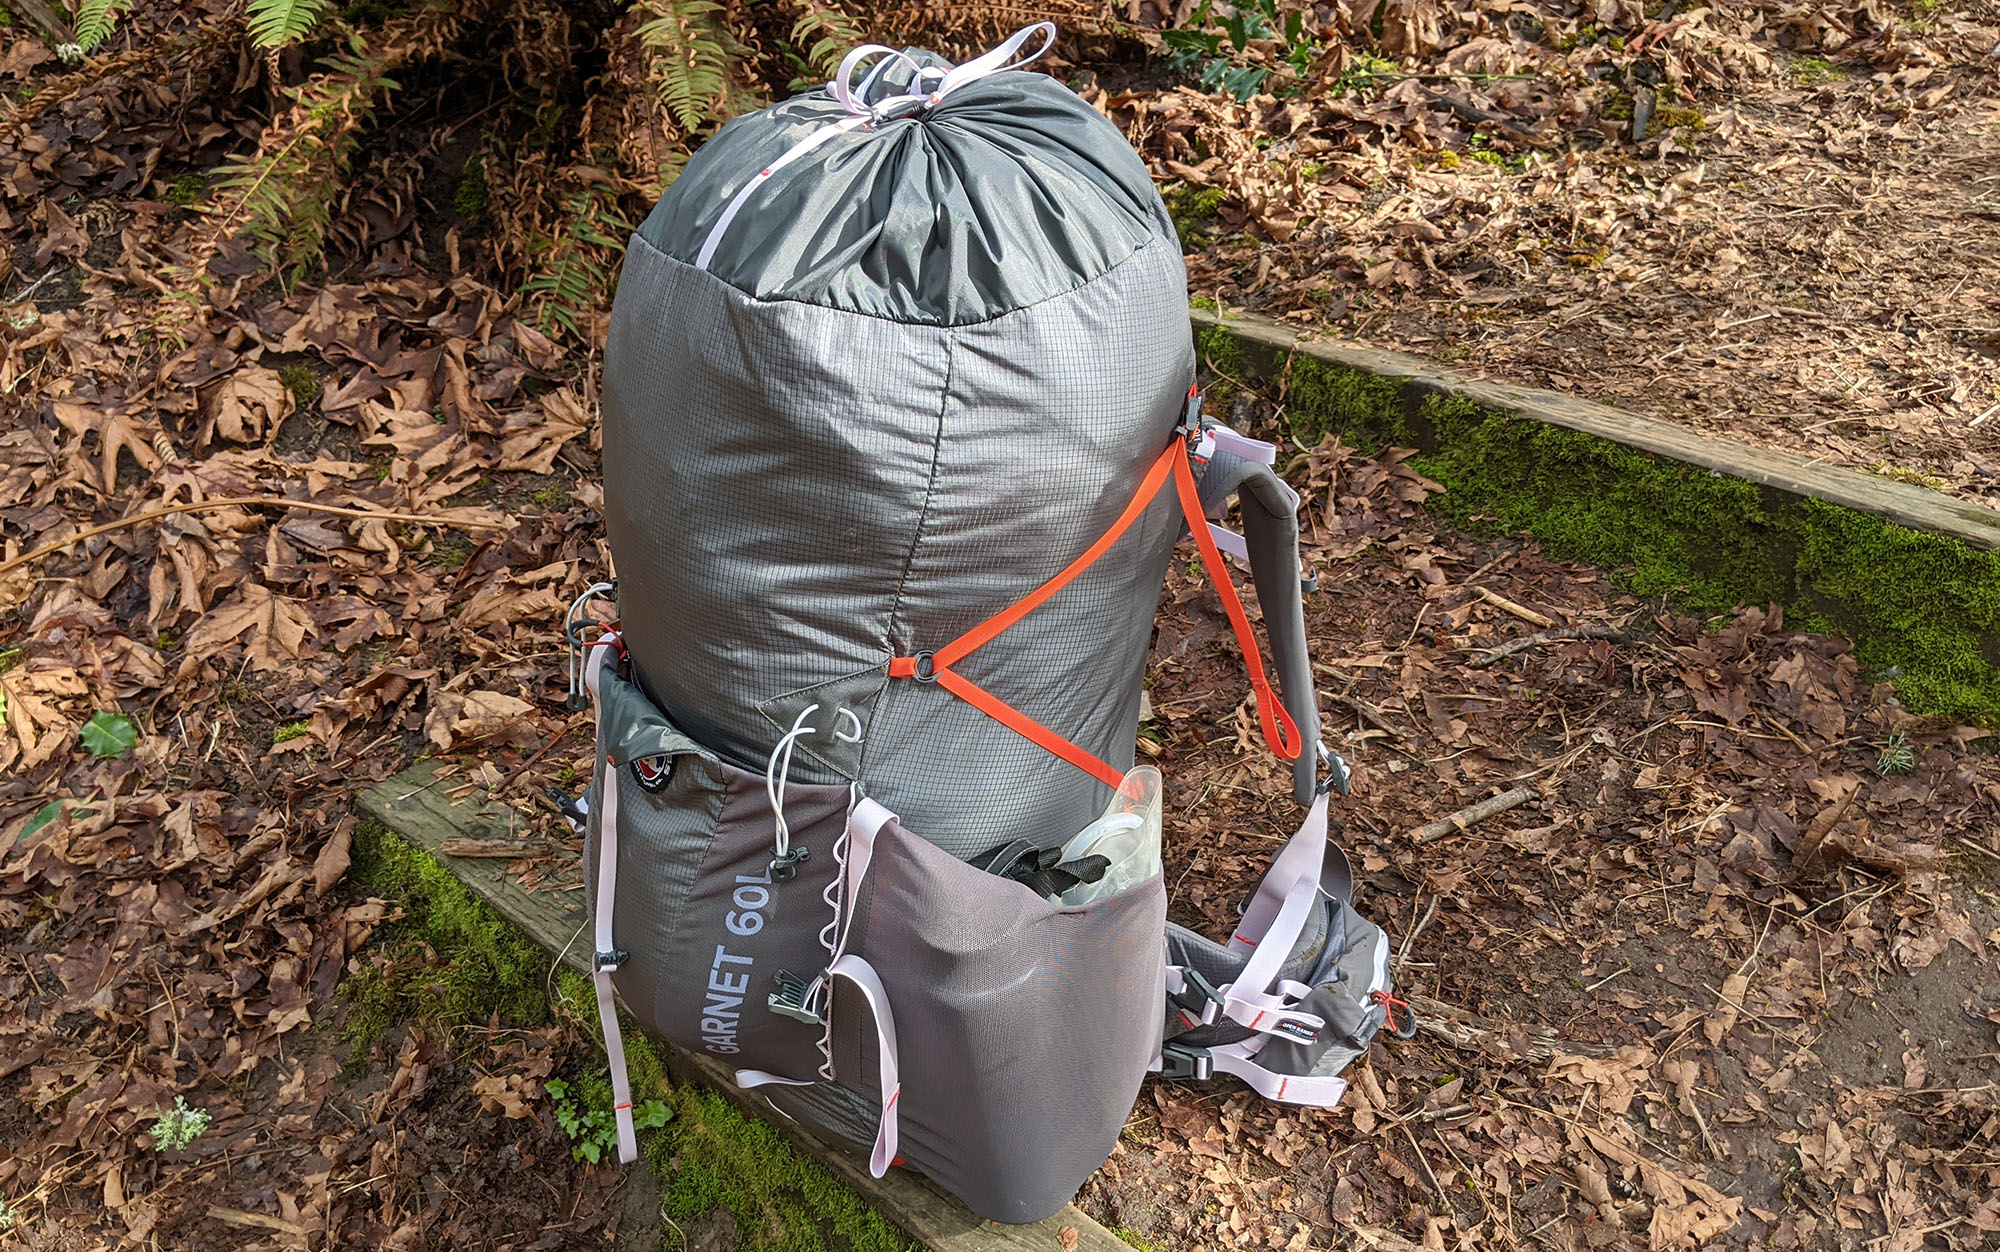 The orange compression straps helped to balance the load of a fully loaded Big Agnes Garnet. 